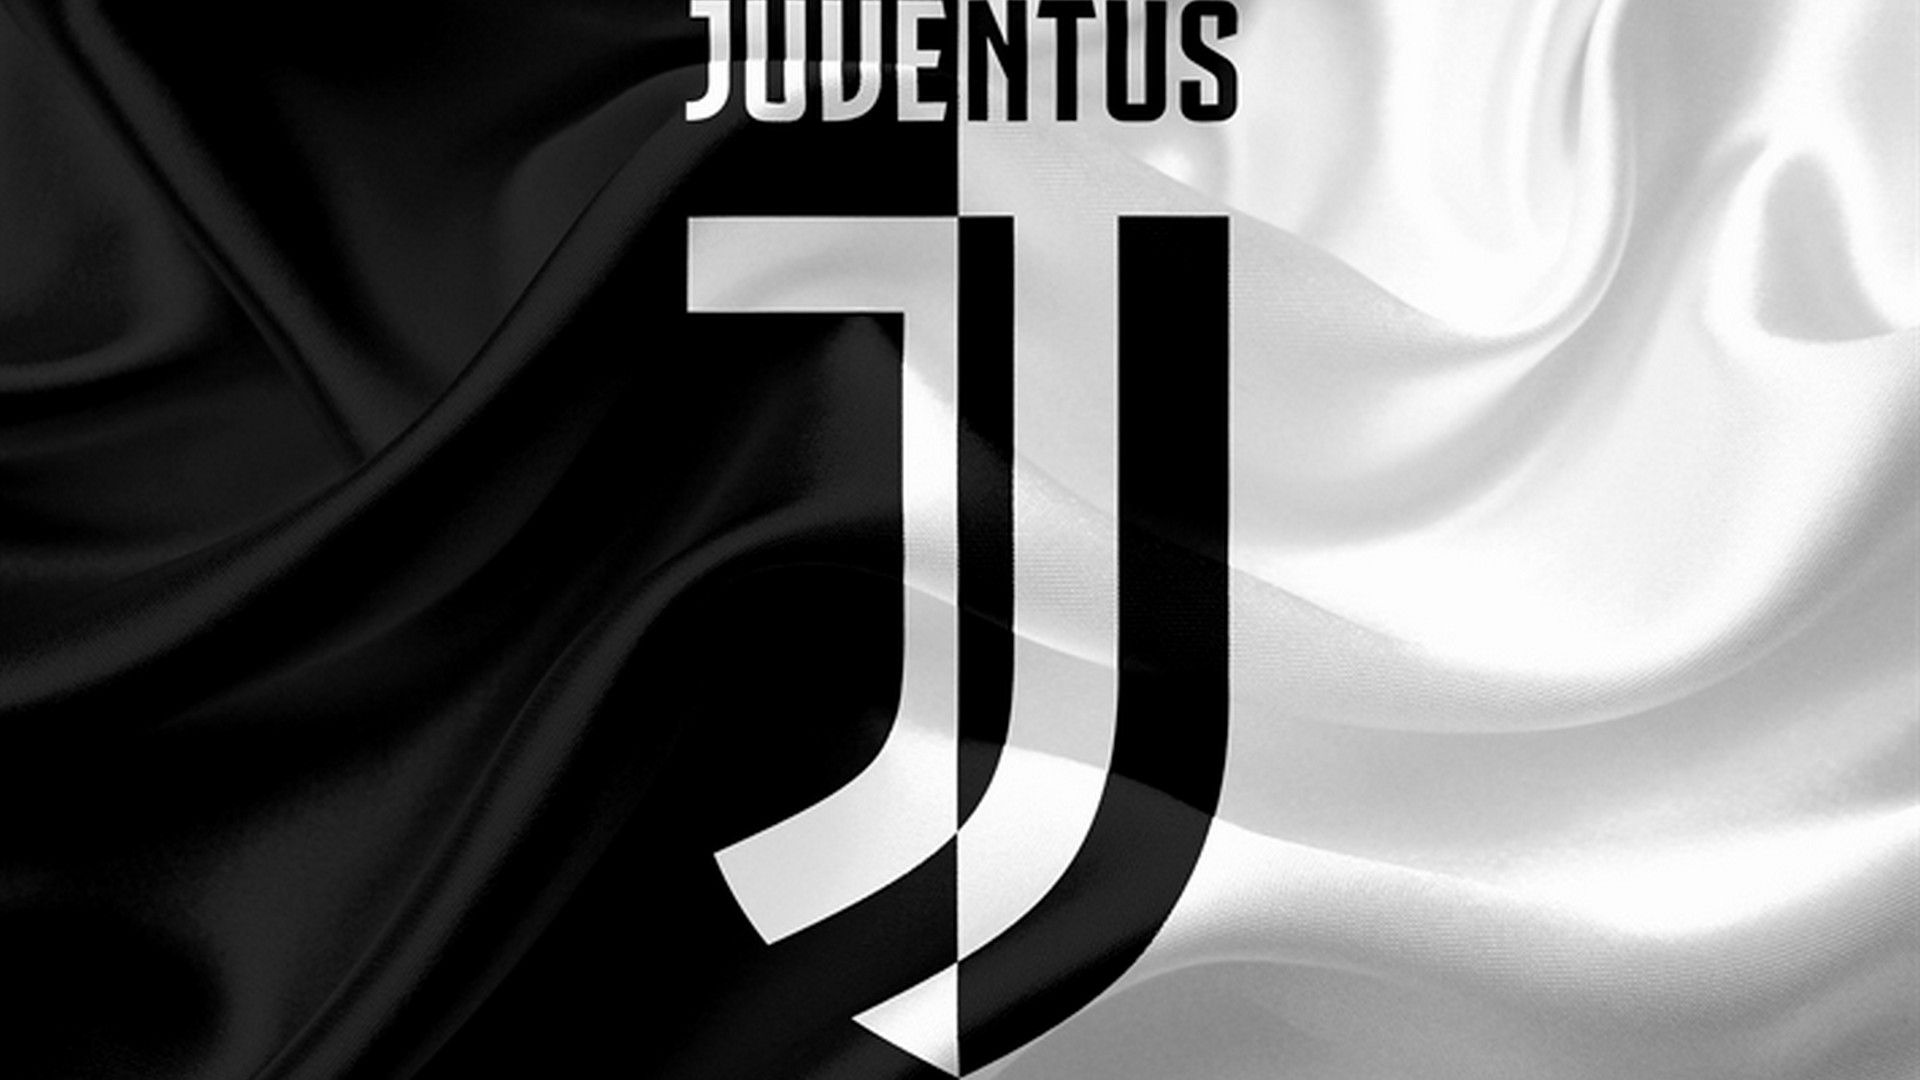 Juventus FC Wallpaper HD With Resolution 1920X1080 pixel. You can make this wallpaper for your Mac or Windows Desktop Background, iPhone, Android or Tablet and another Smartphone device for free